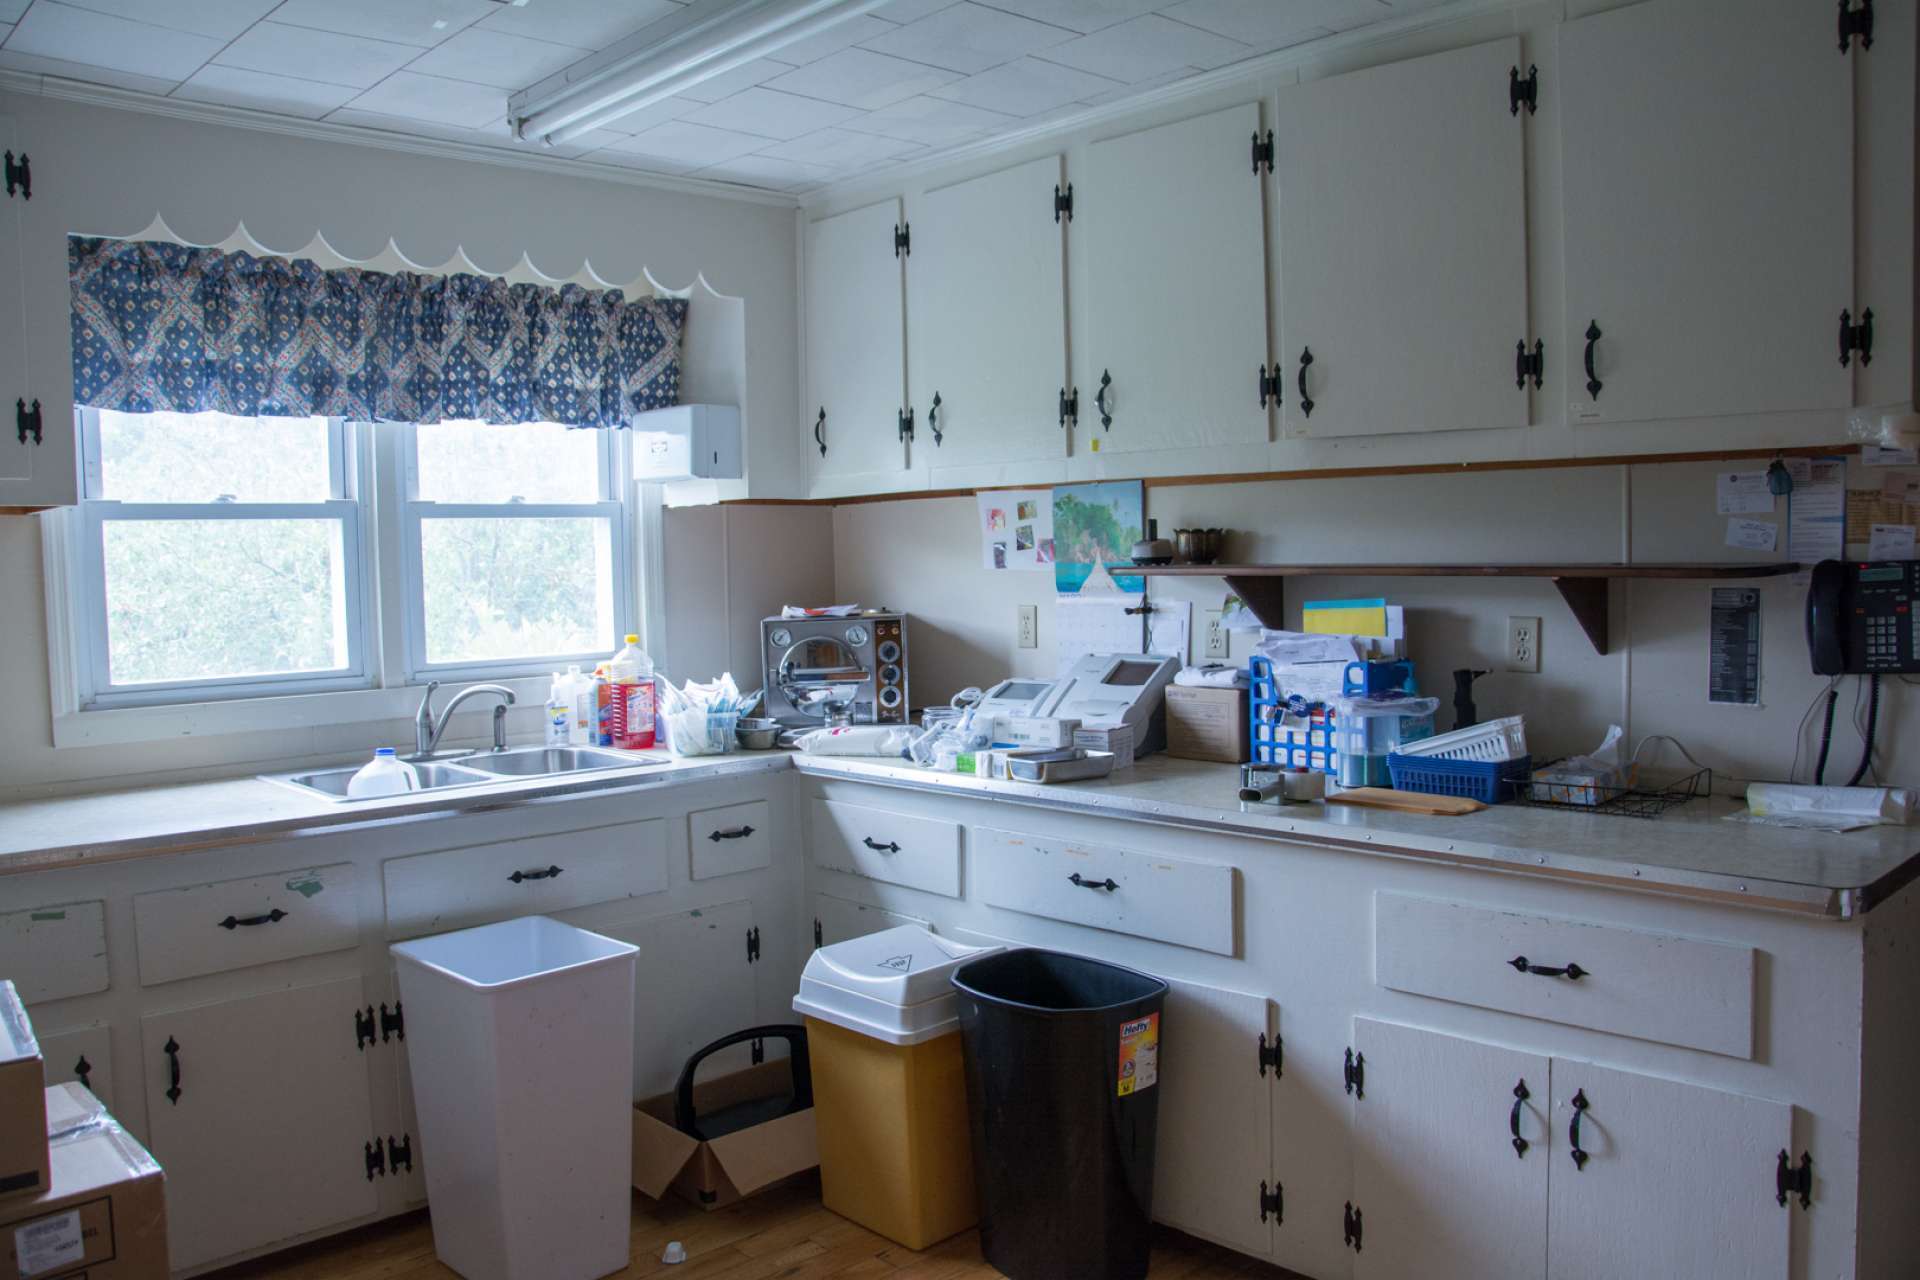 There is a kitchen with both upper and lower cabinets for lots of storage or lunch area.